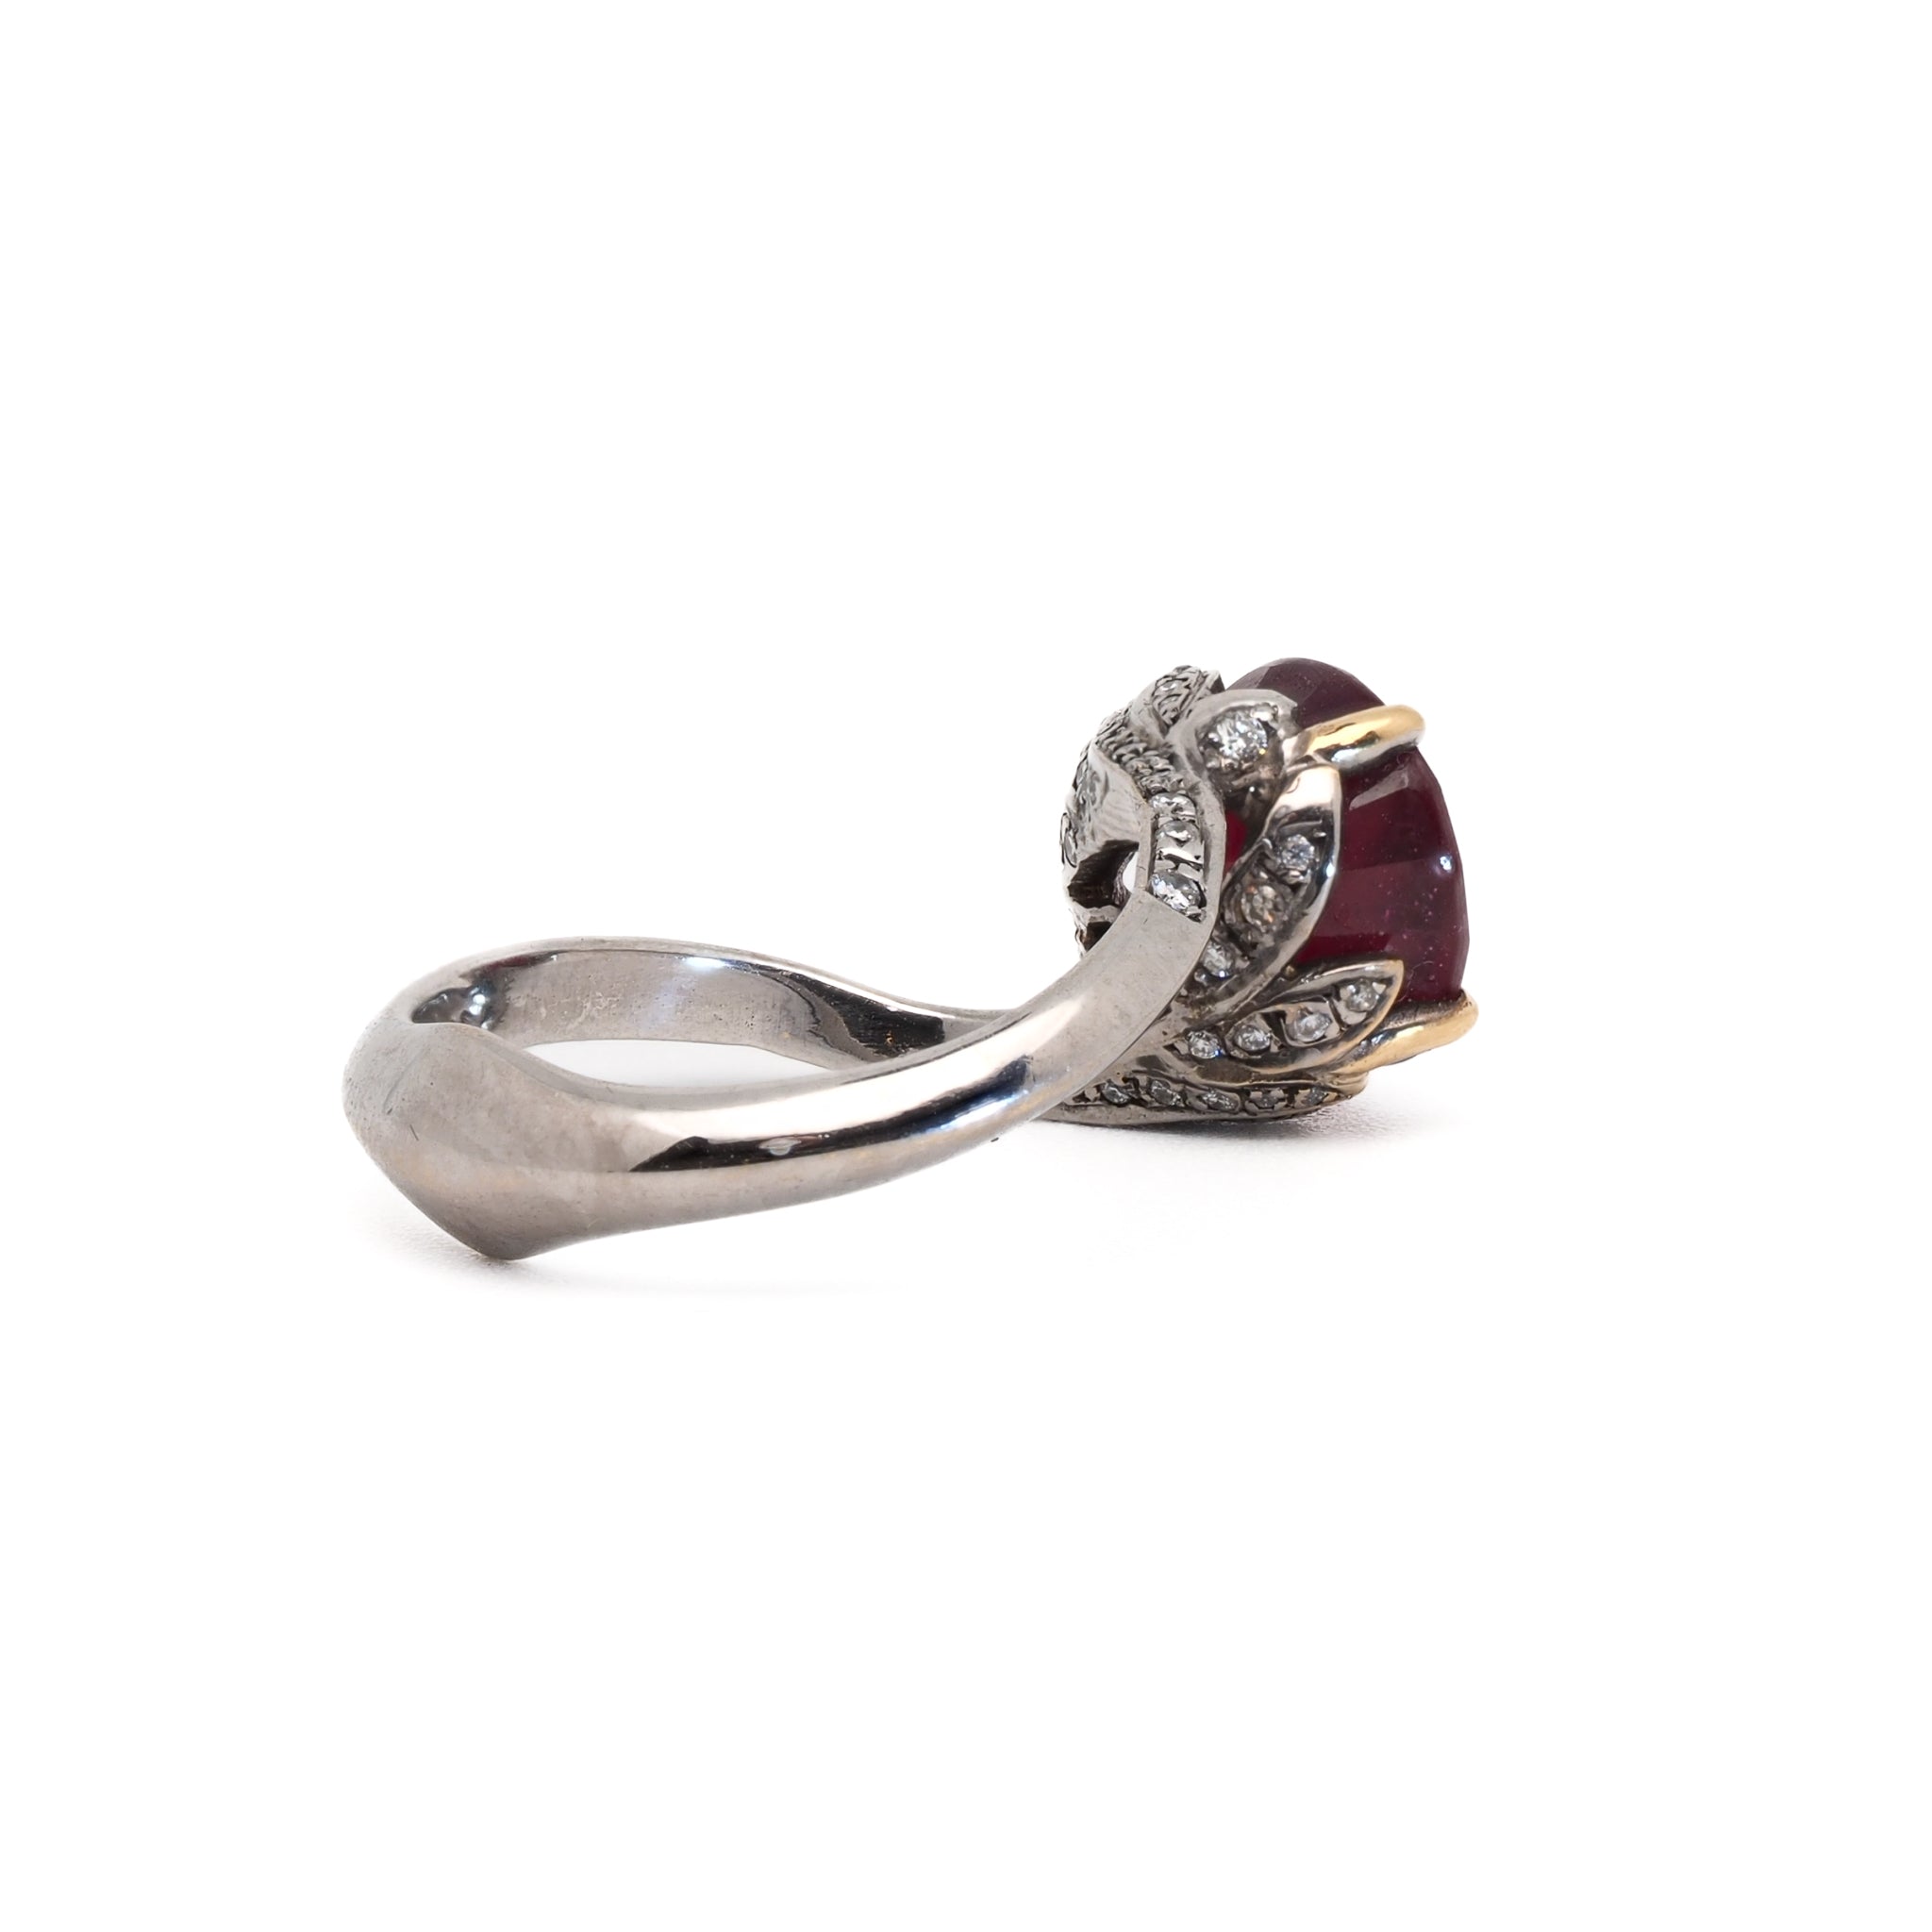 Customizable - Contact us to personalize your Twisted Ruby Engagement Ring.